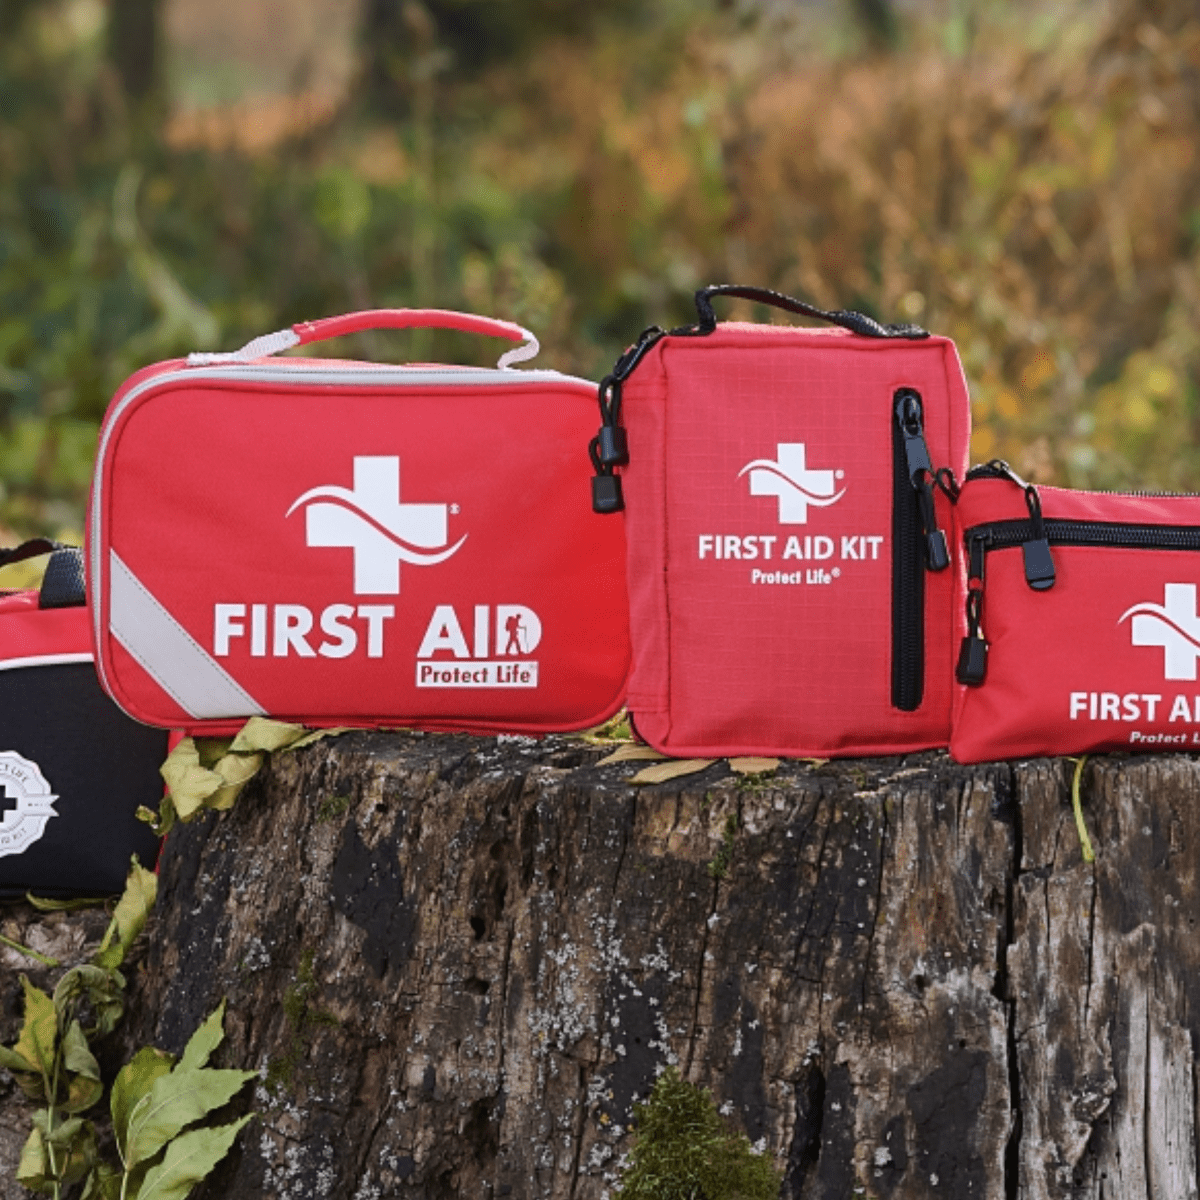 Is to protect life. Аптечка Дачная. First Aid Kit for hike. Naturehike аптечка. Дачная аптечка собираем.